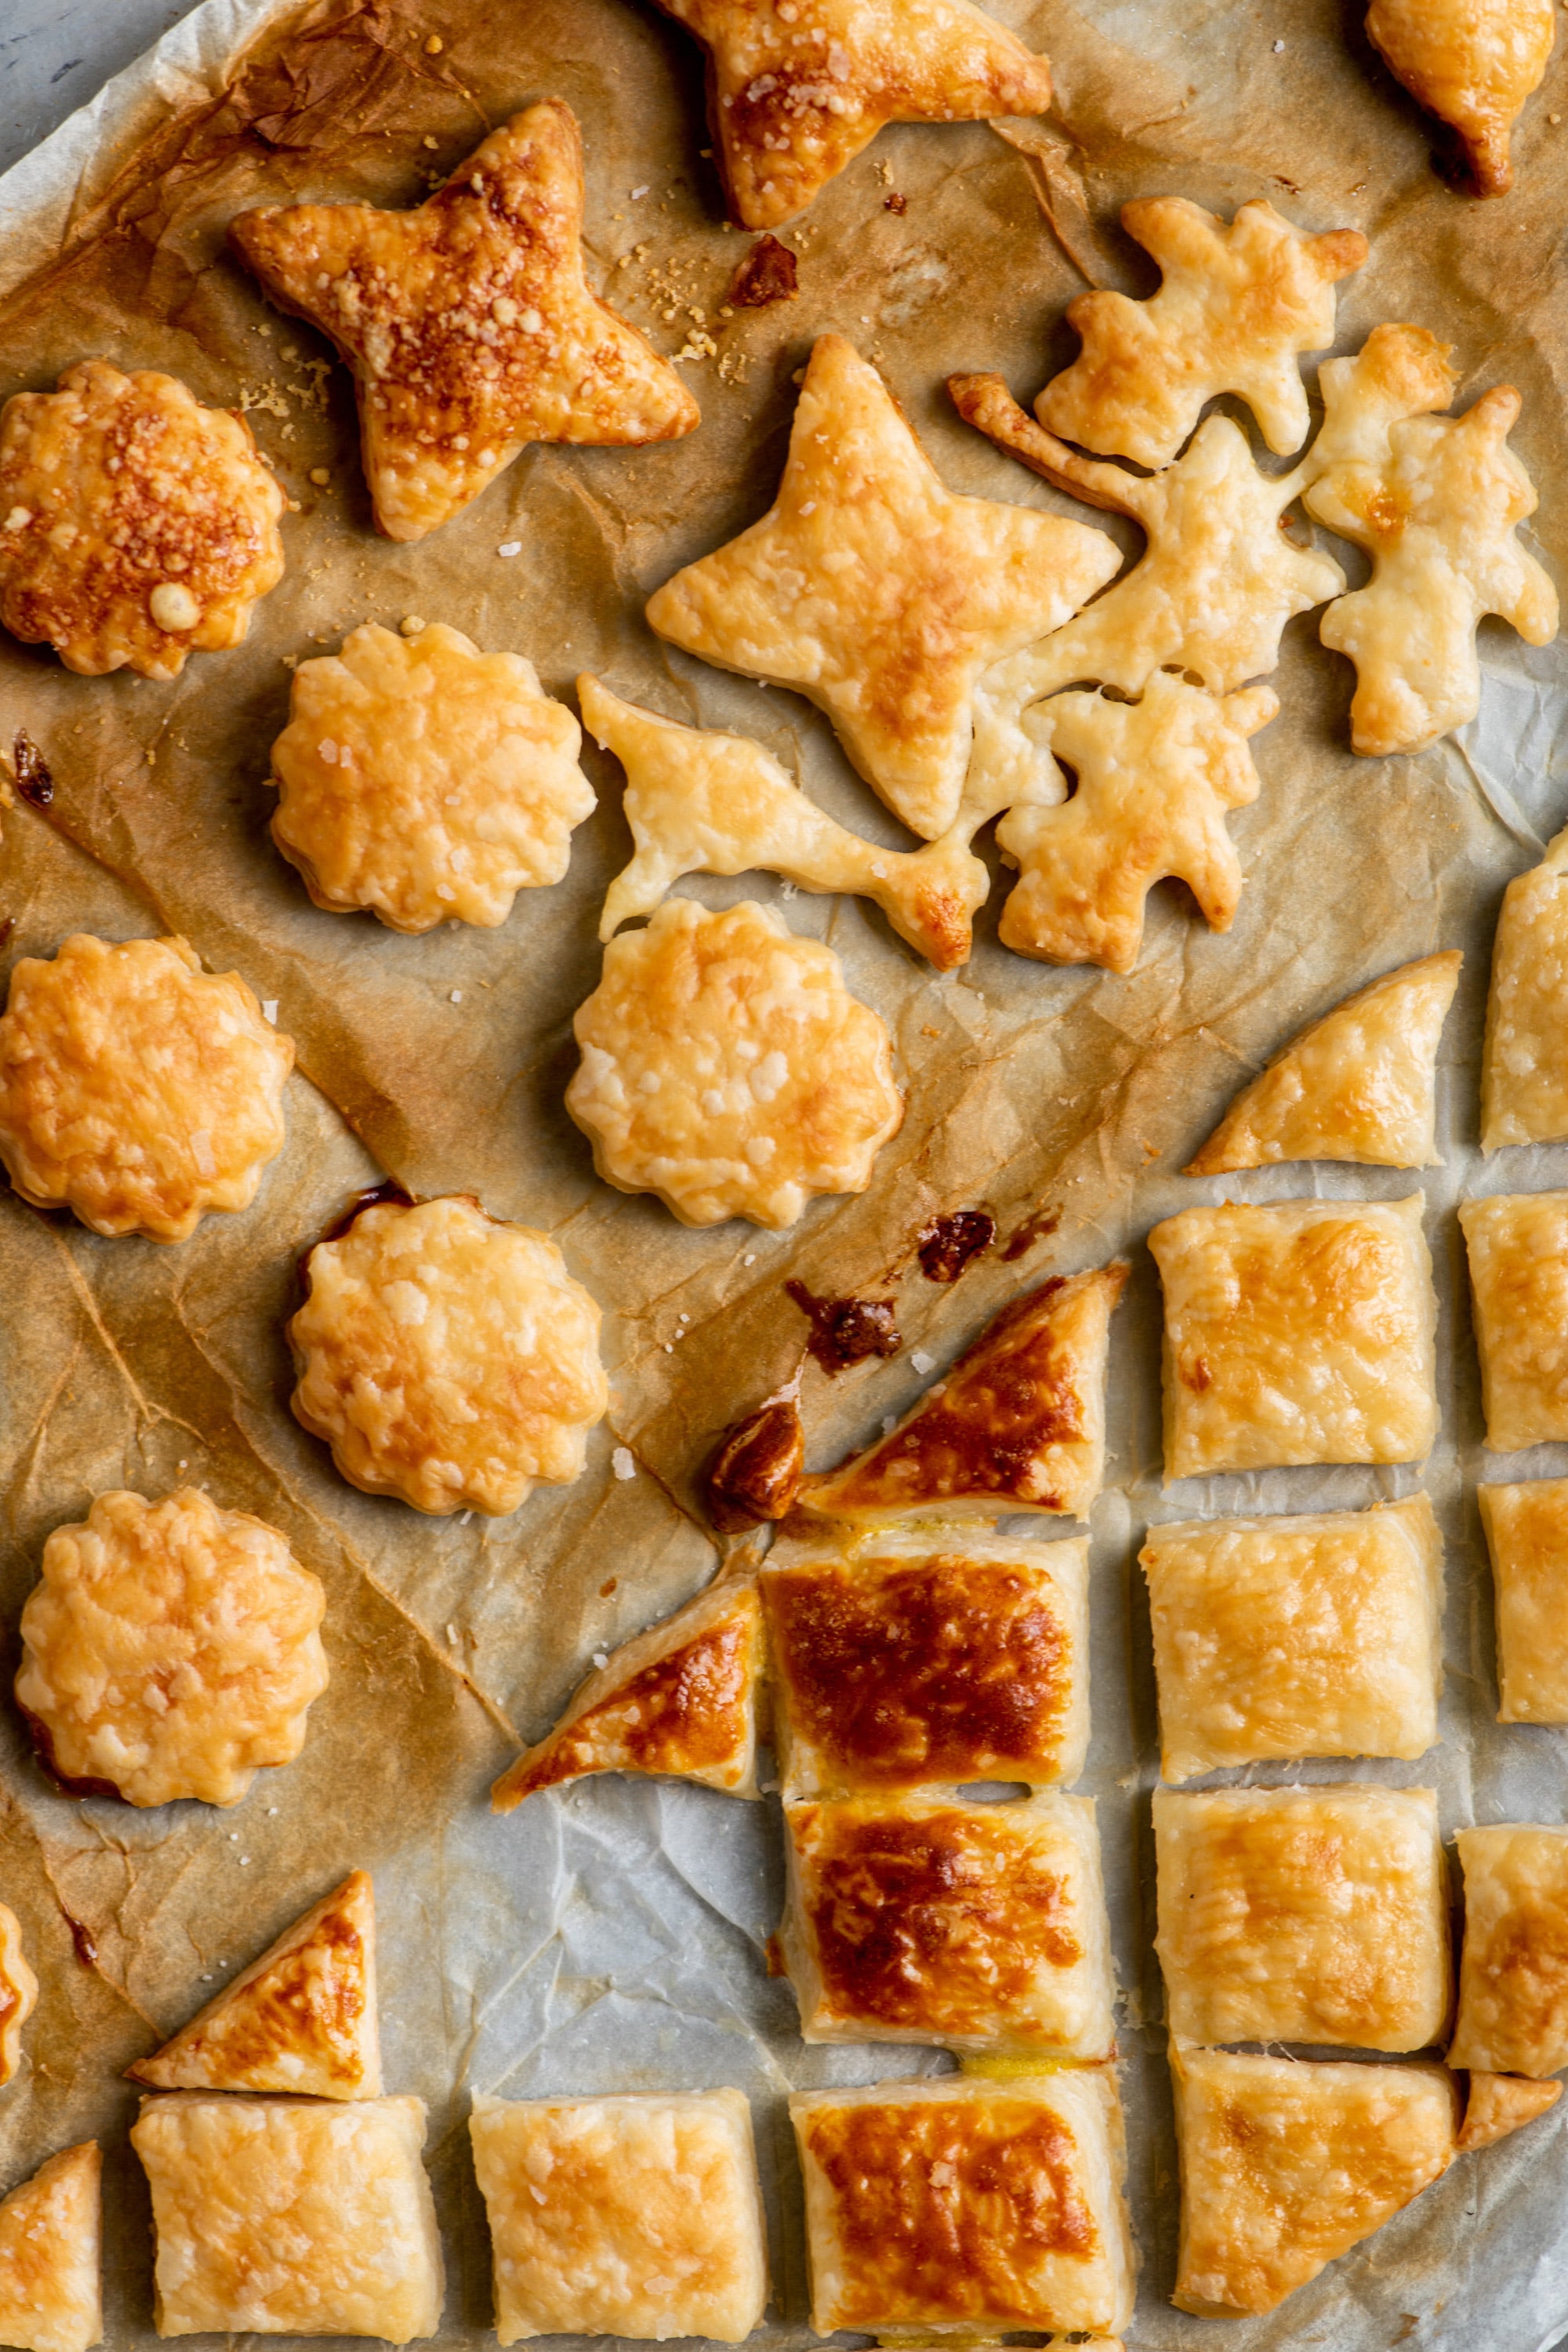 How to Make Puff Pastry Croutons